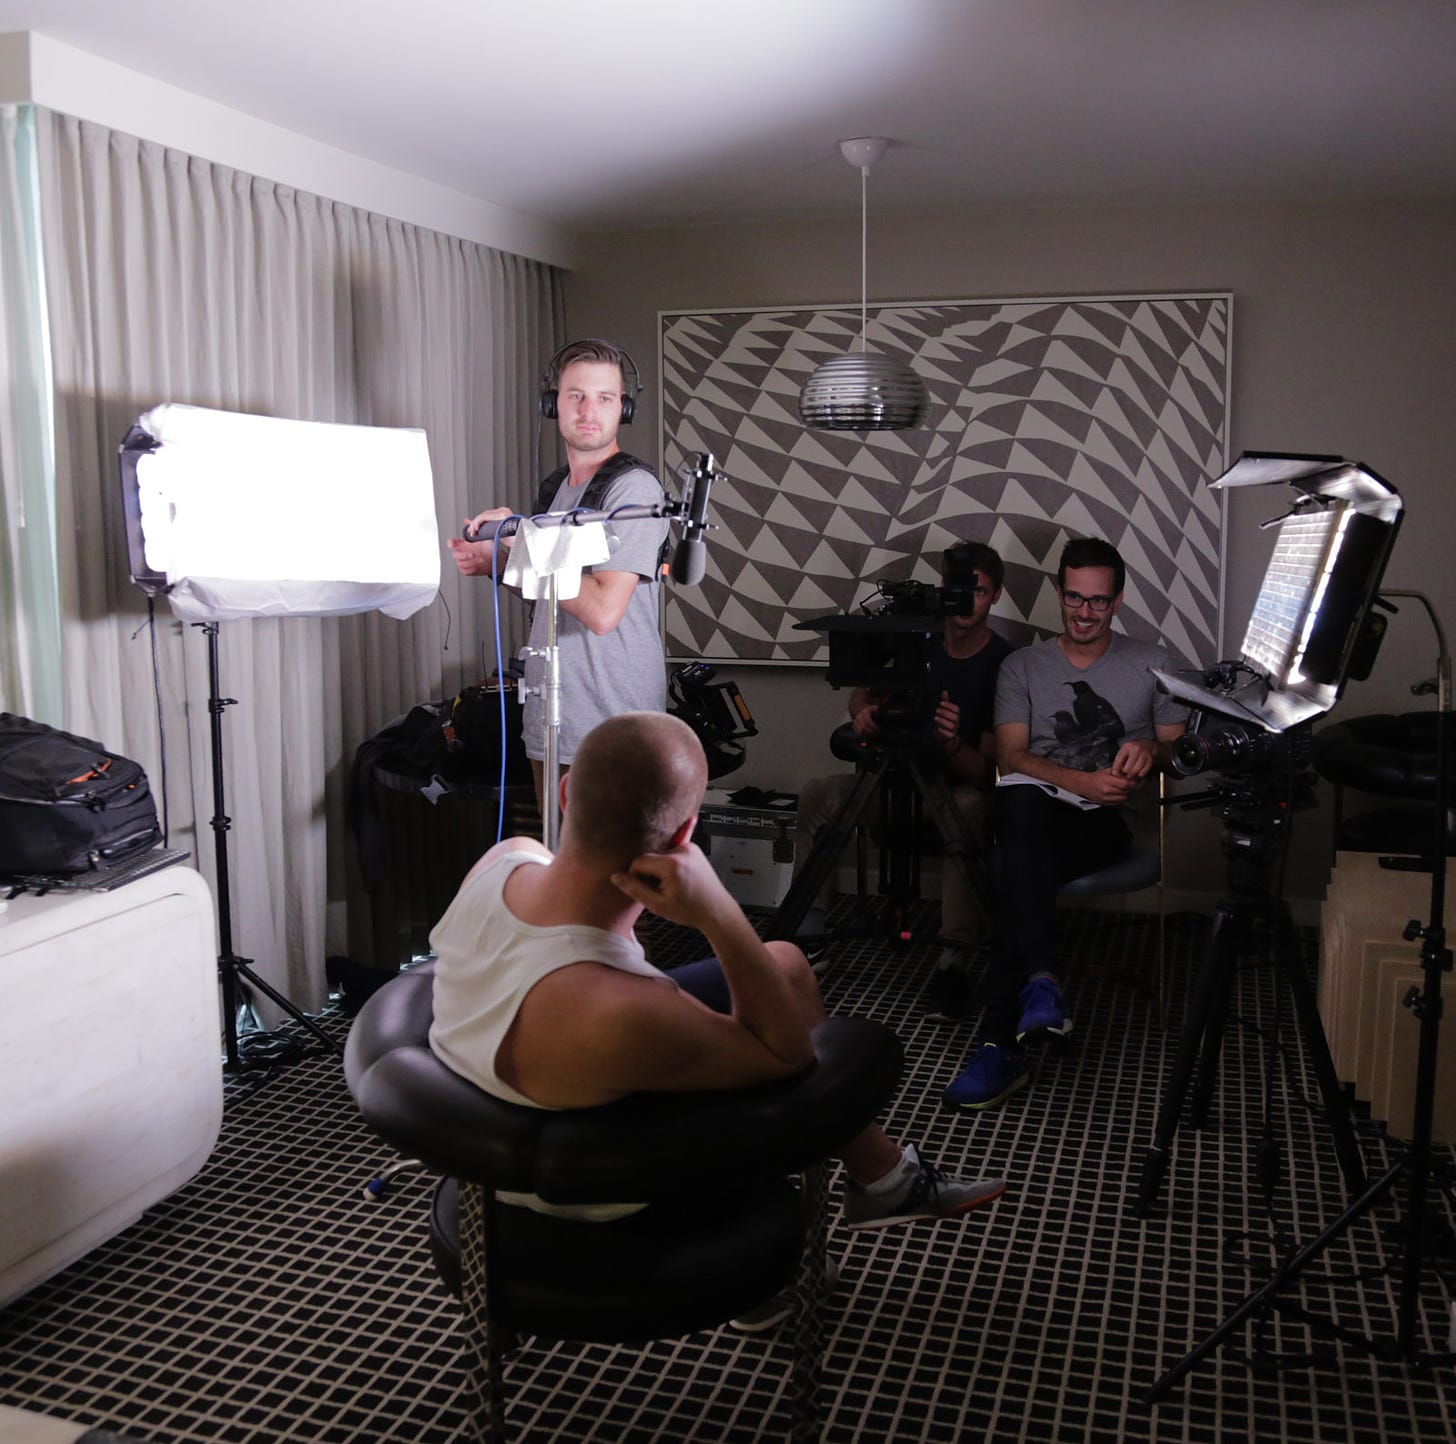 A cramped hotel shoot in Tickled